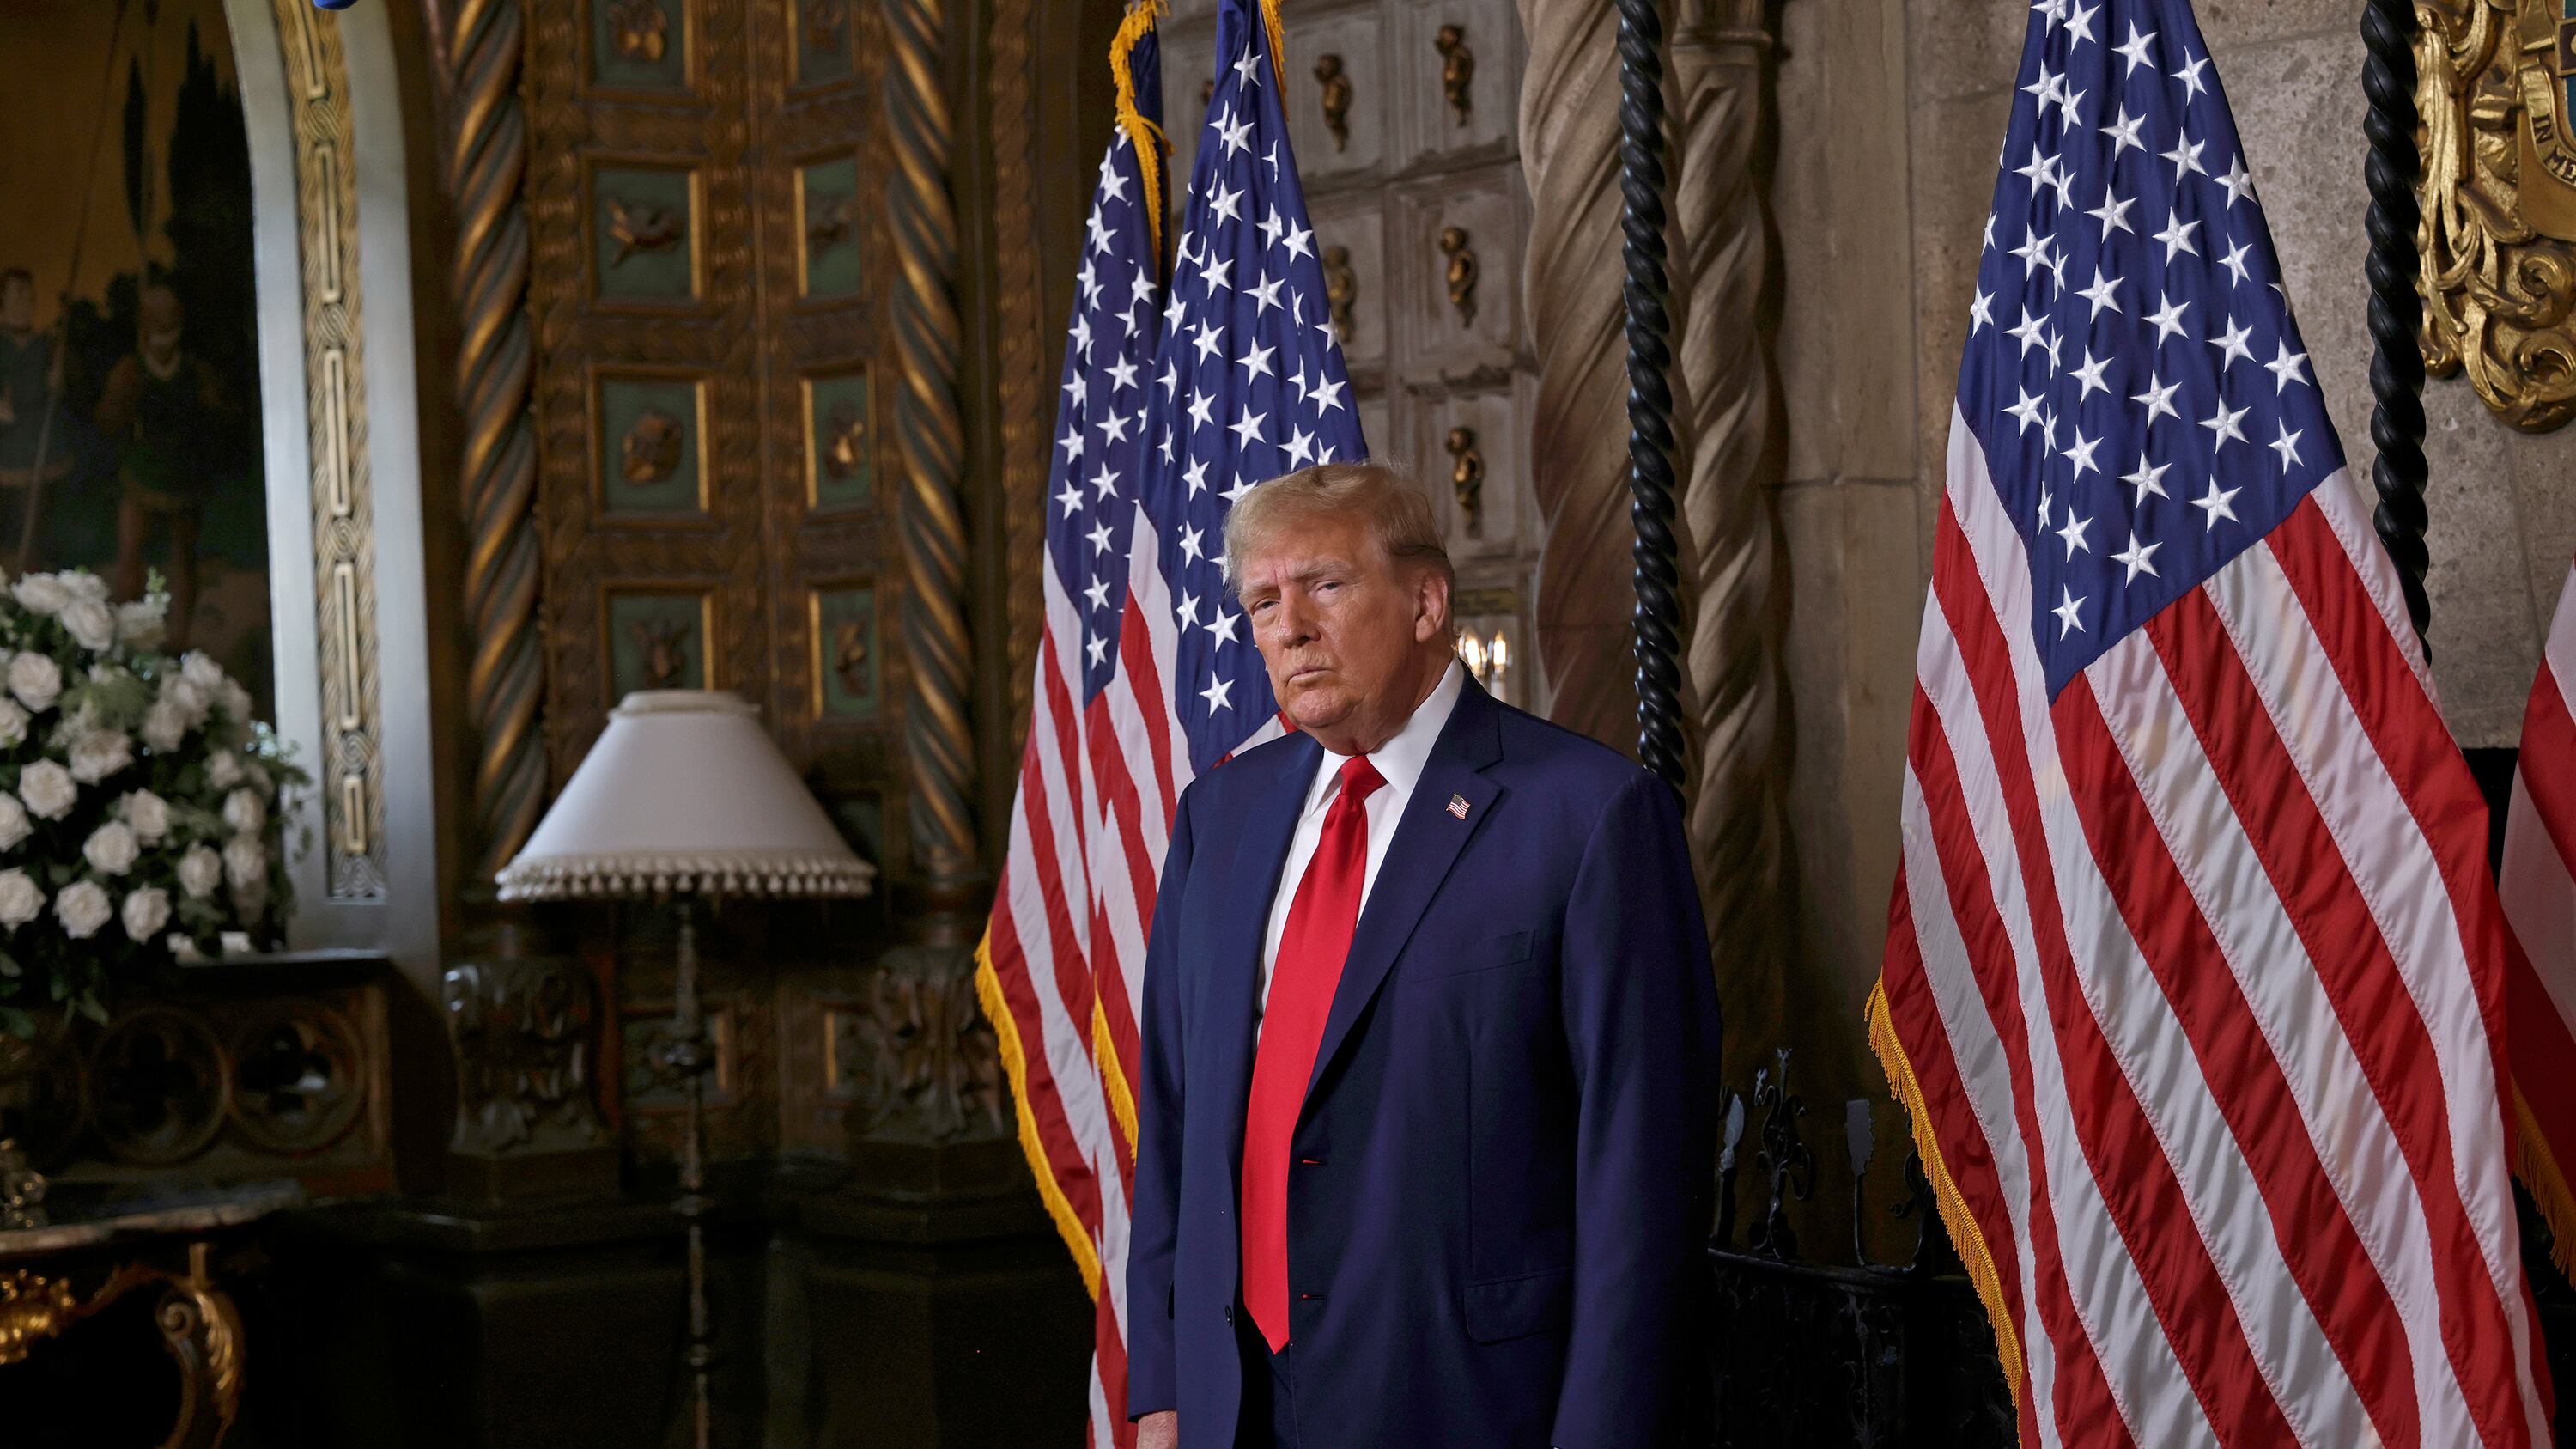 Donald Trump wearing a dark suit and red tie stands between two American flags with a lamp and flowers to the left of him and wooden doors in the background.